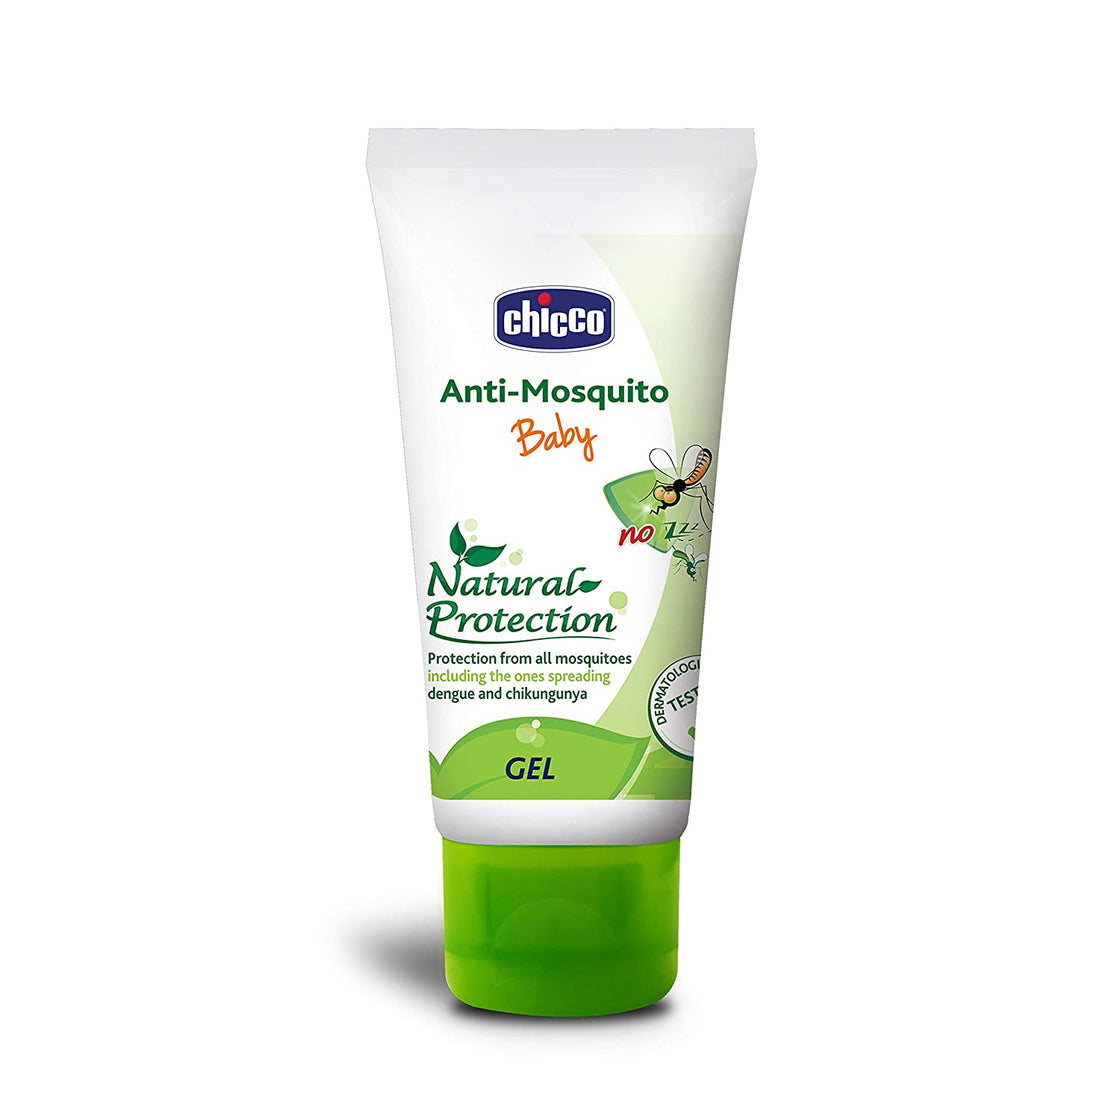 Chicco Anti-Mosquito Gel for Babies, Protects Against Dengue, Malaria and Chikungunya, DEET Free, Dermatologically Tested (100ml)